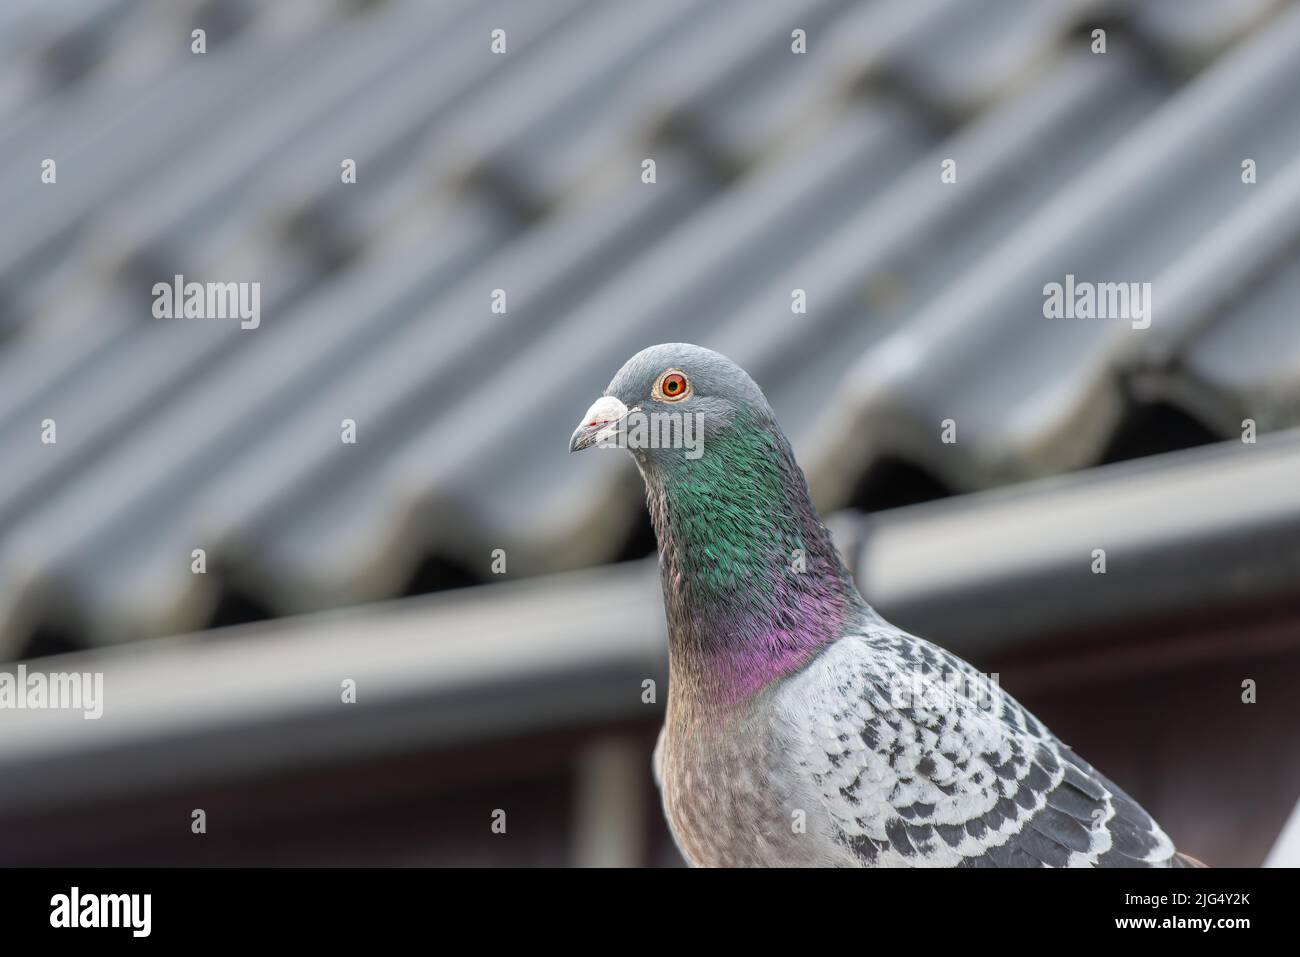 Portrait of a racing or homing pigeon posing in front of a roof Stock Photo